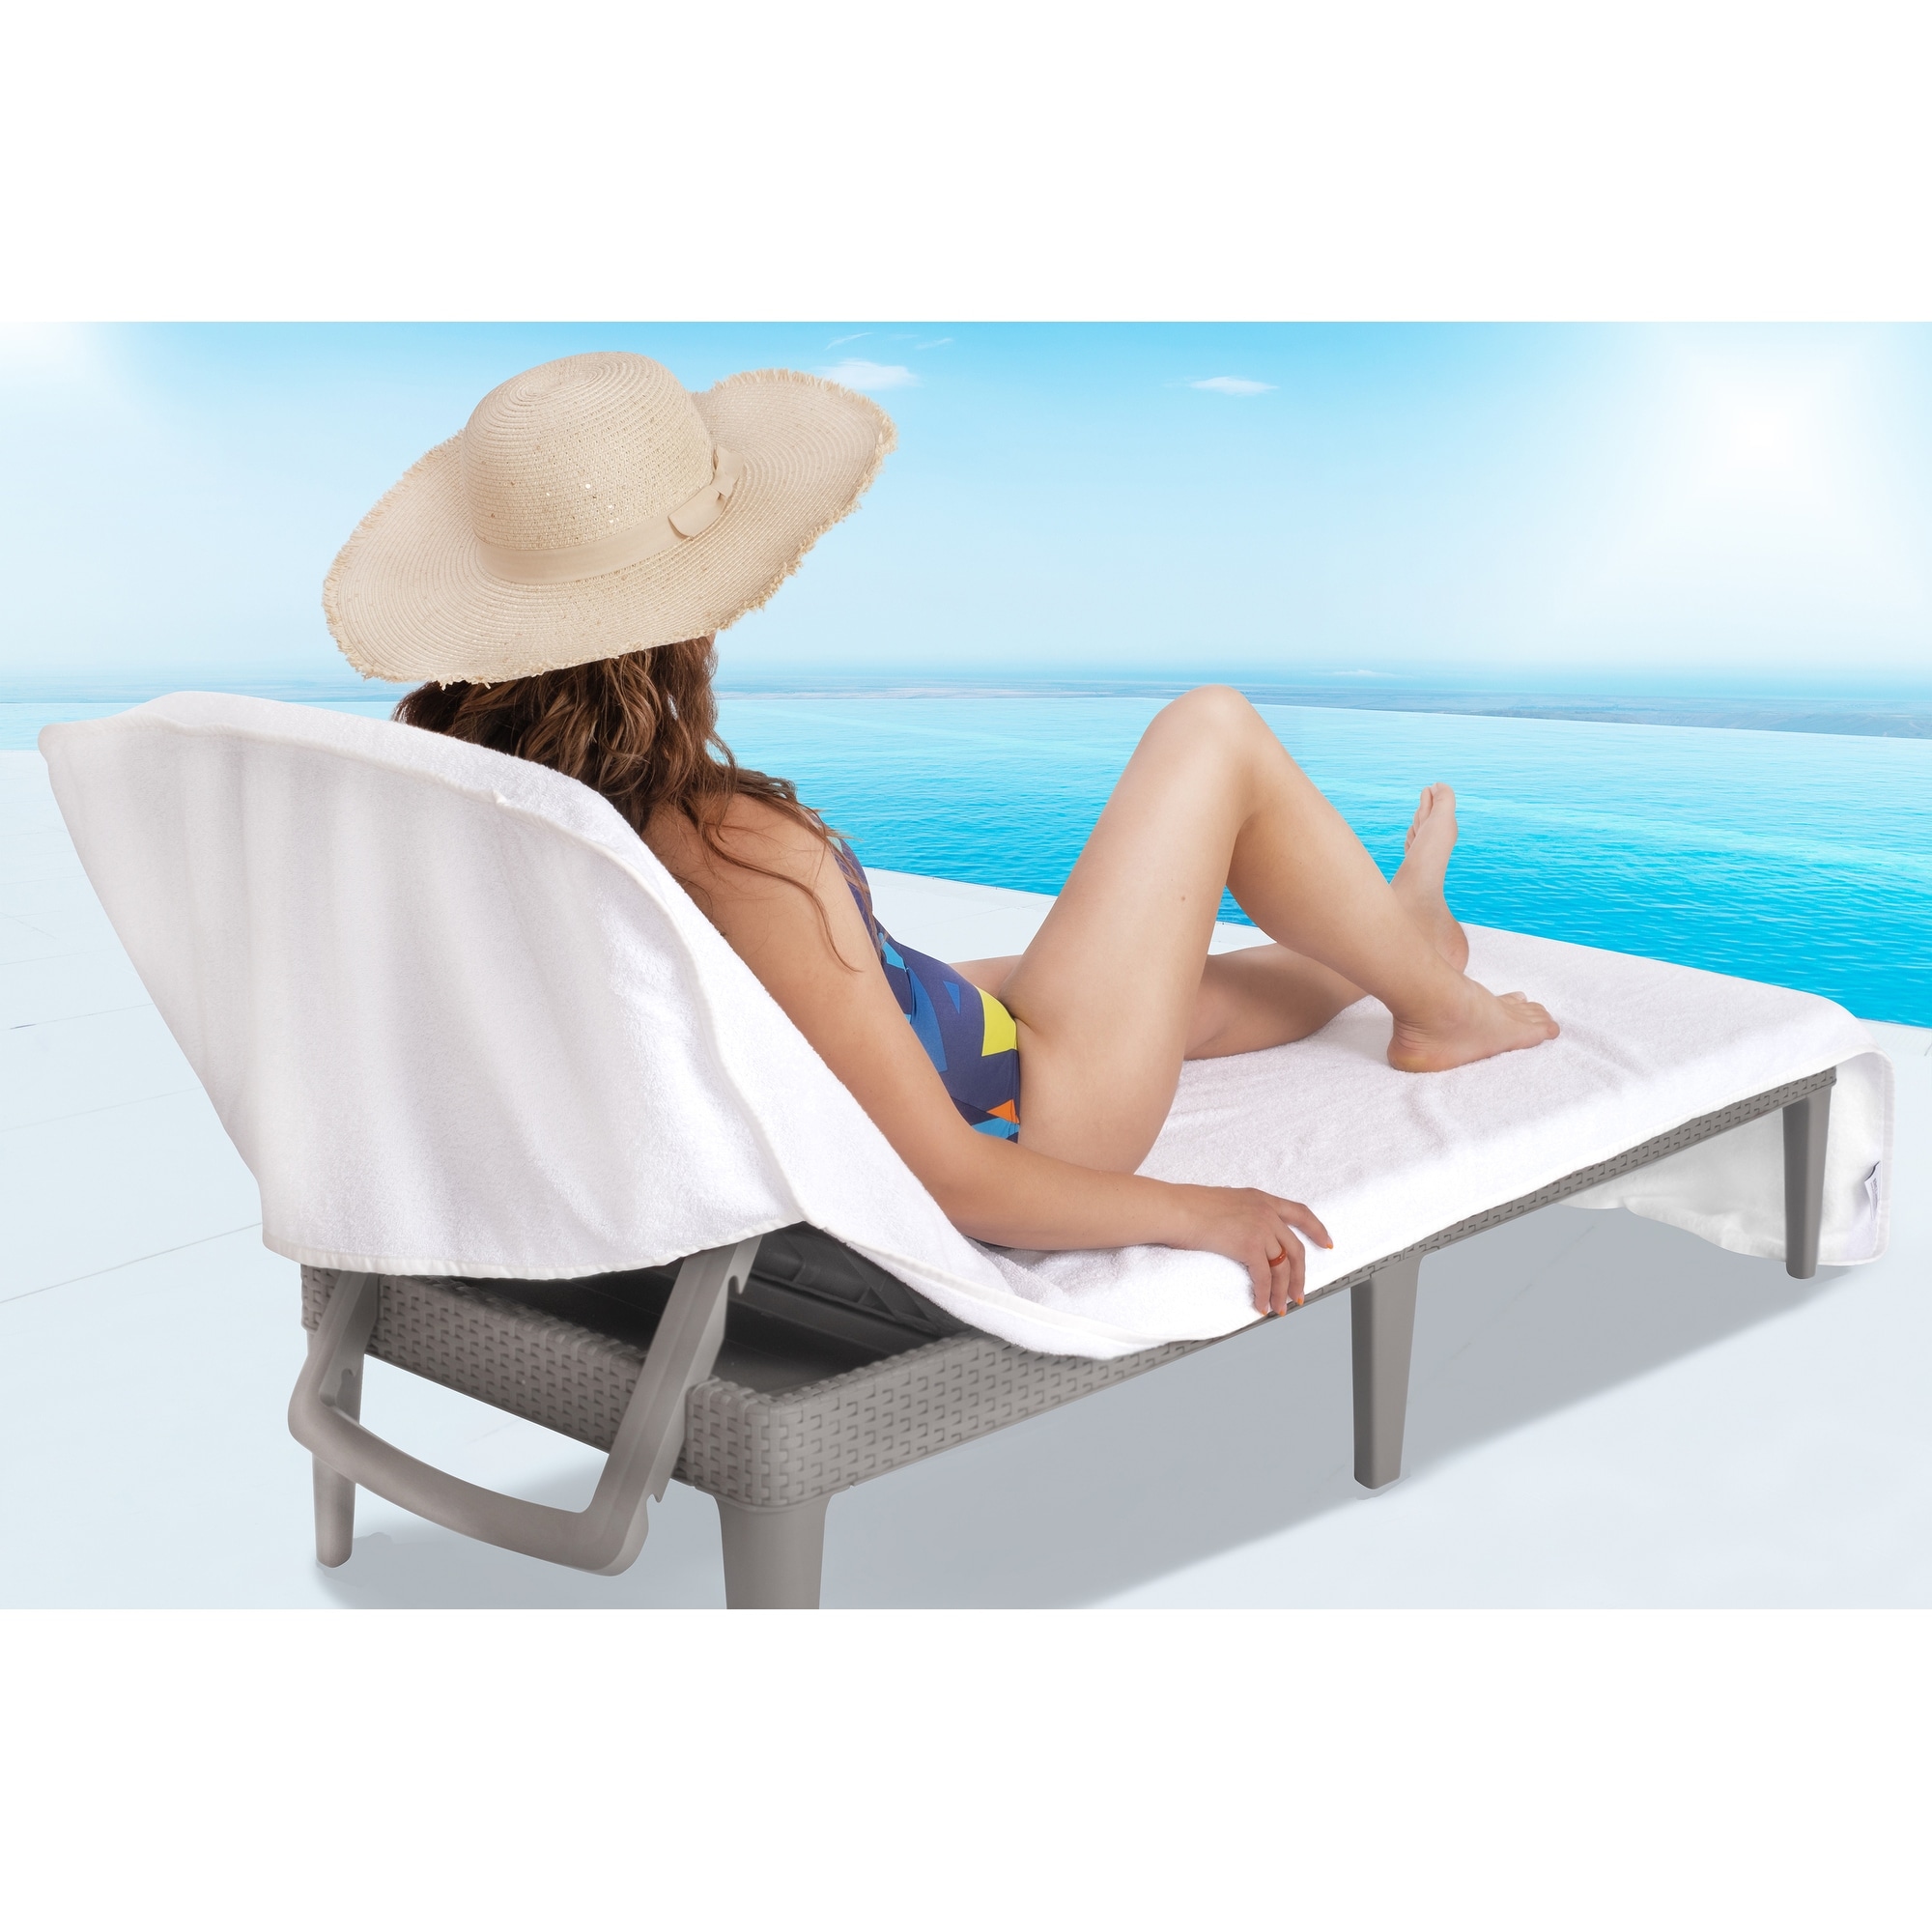 https://ak1.ostkcdn.com/images/products/is/images/direct/295a9bb3f5ae015d4754a900b82f0a89a7895e74/American-Soft-Linen-Beach-and-Pool-Lounge-Chair-Towel-with-Pocket.jpg